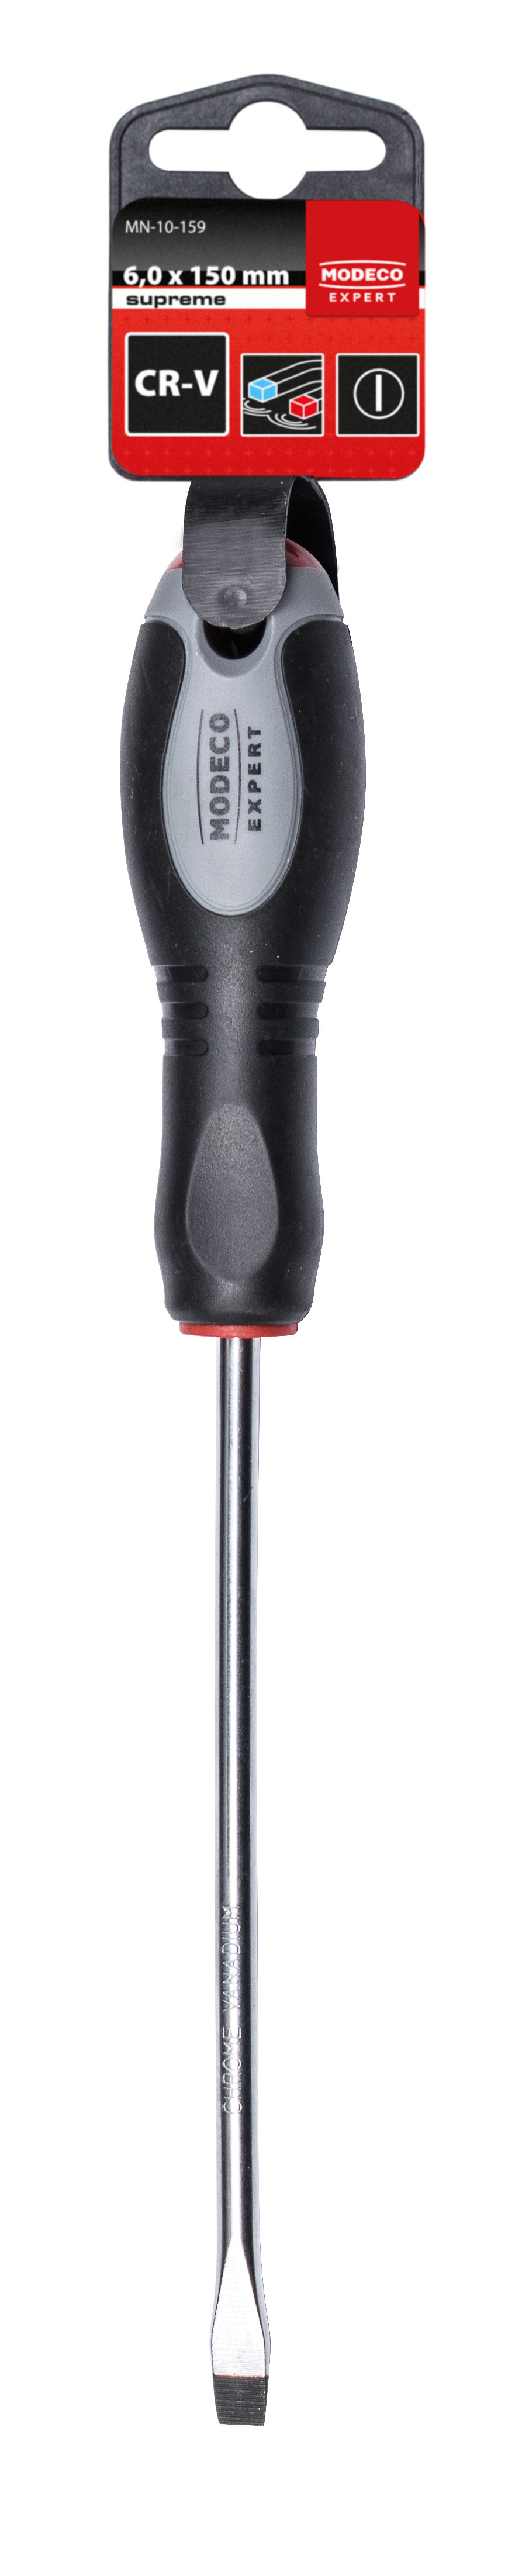 MN-10-15 Slotted screwdrivers supreme